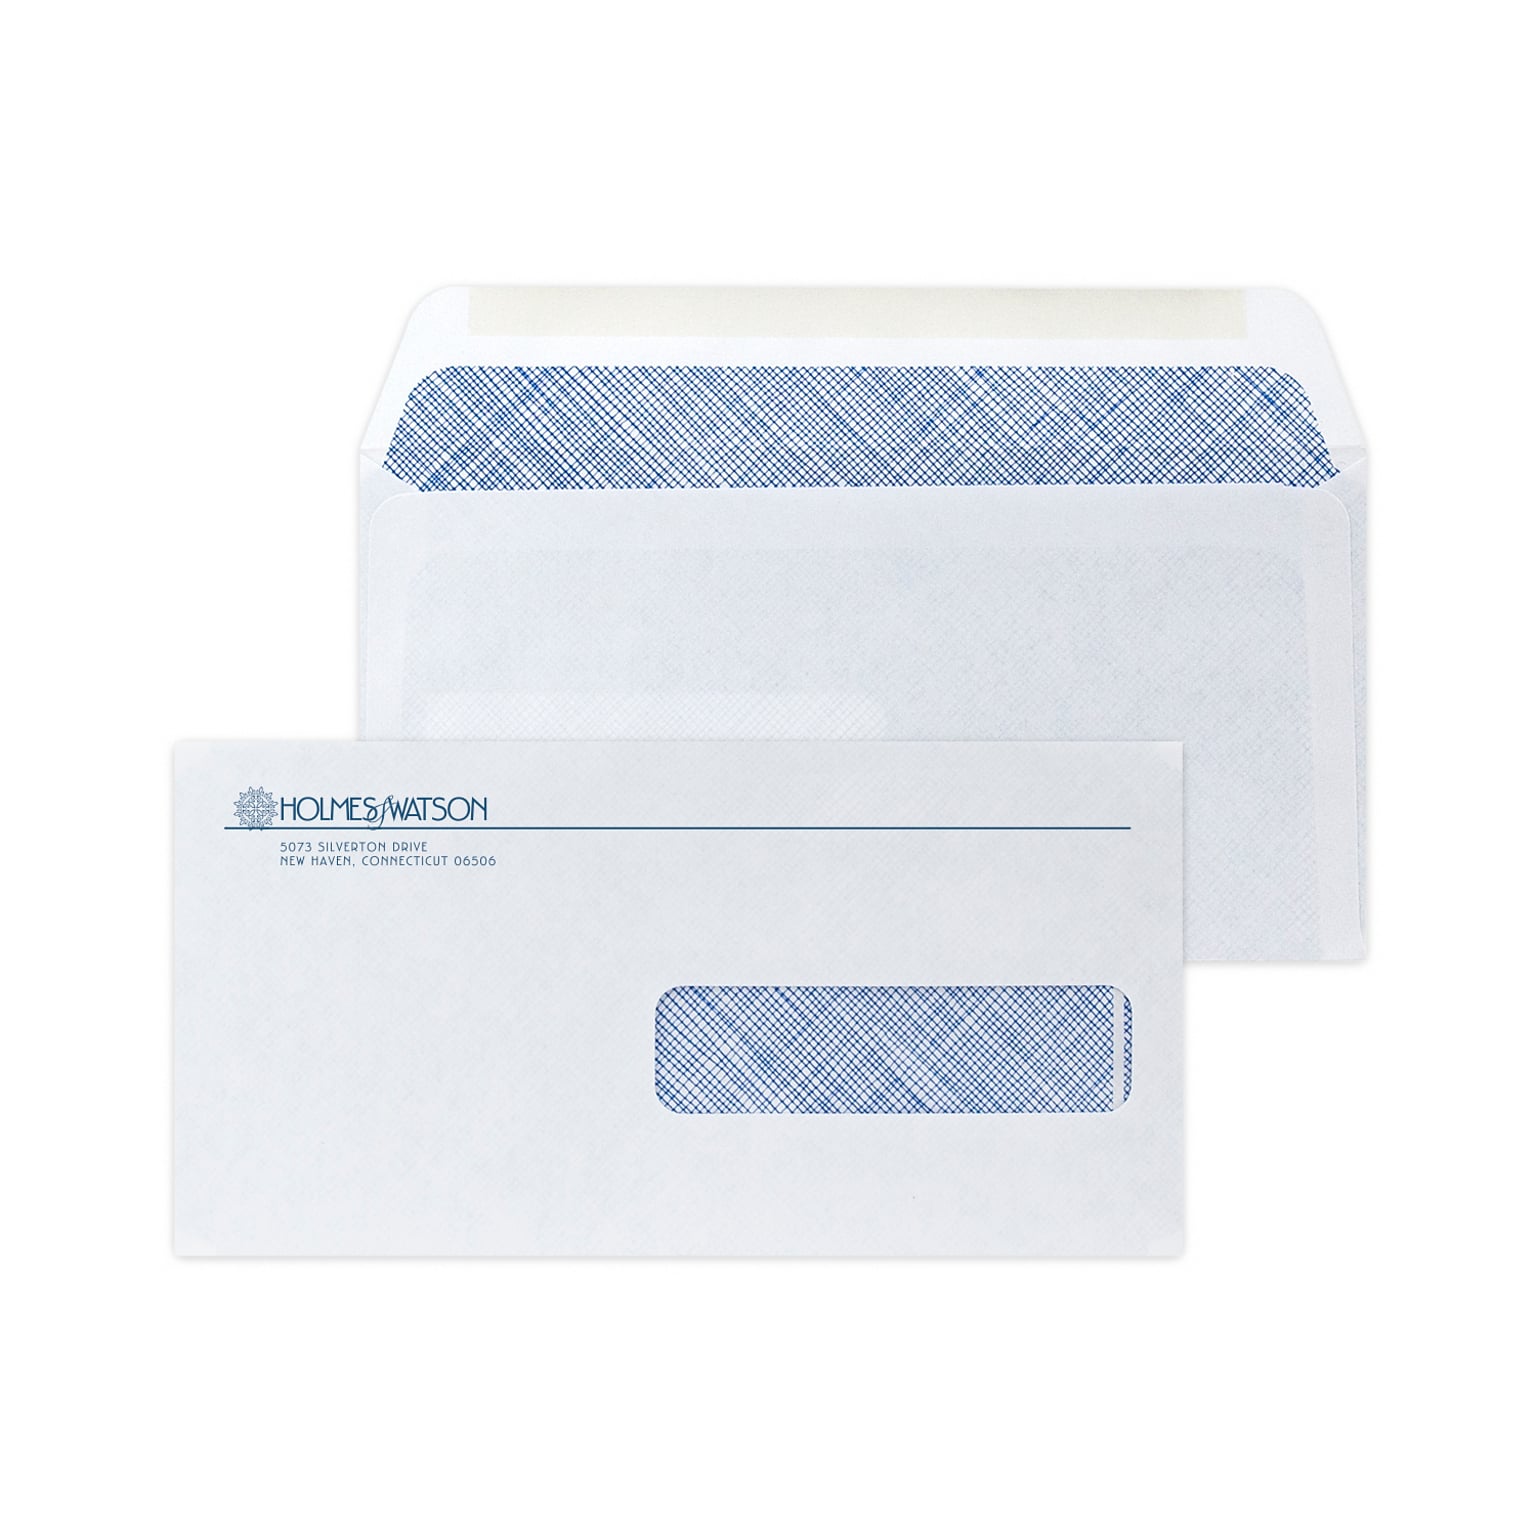 Custom 4-1/2 x 9 Insurance Claim Right Window Standard Envelopes with Security Tint, 24# White Wove, 1 Custom Ink, 250 / Pack